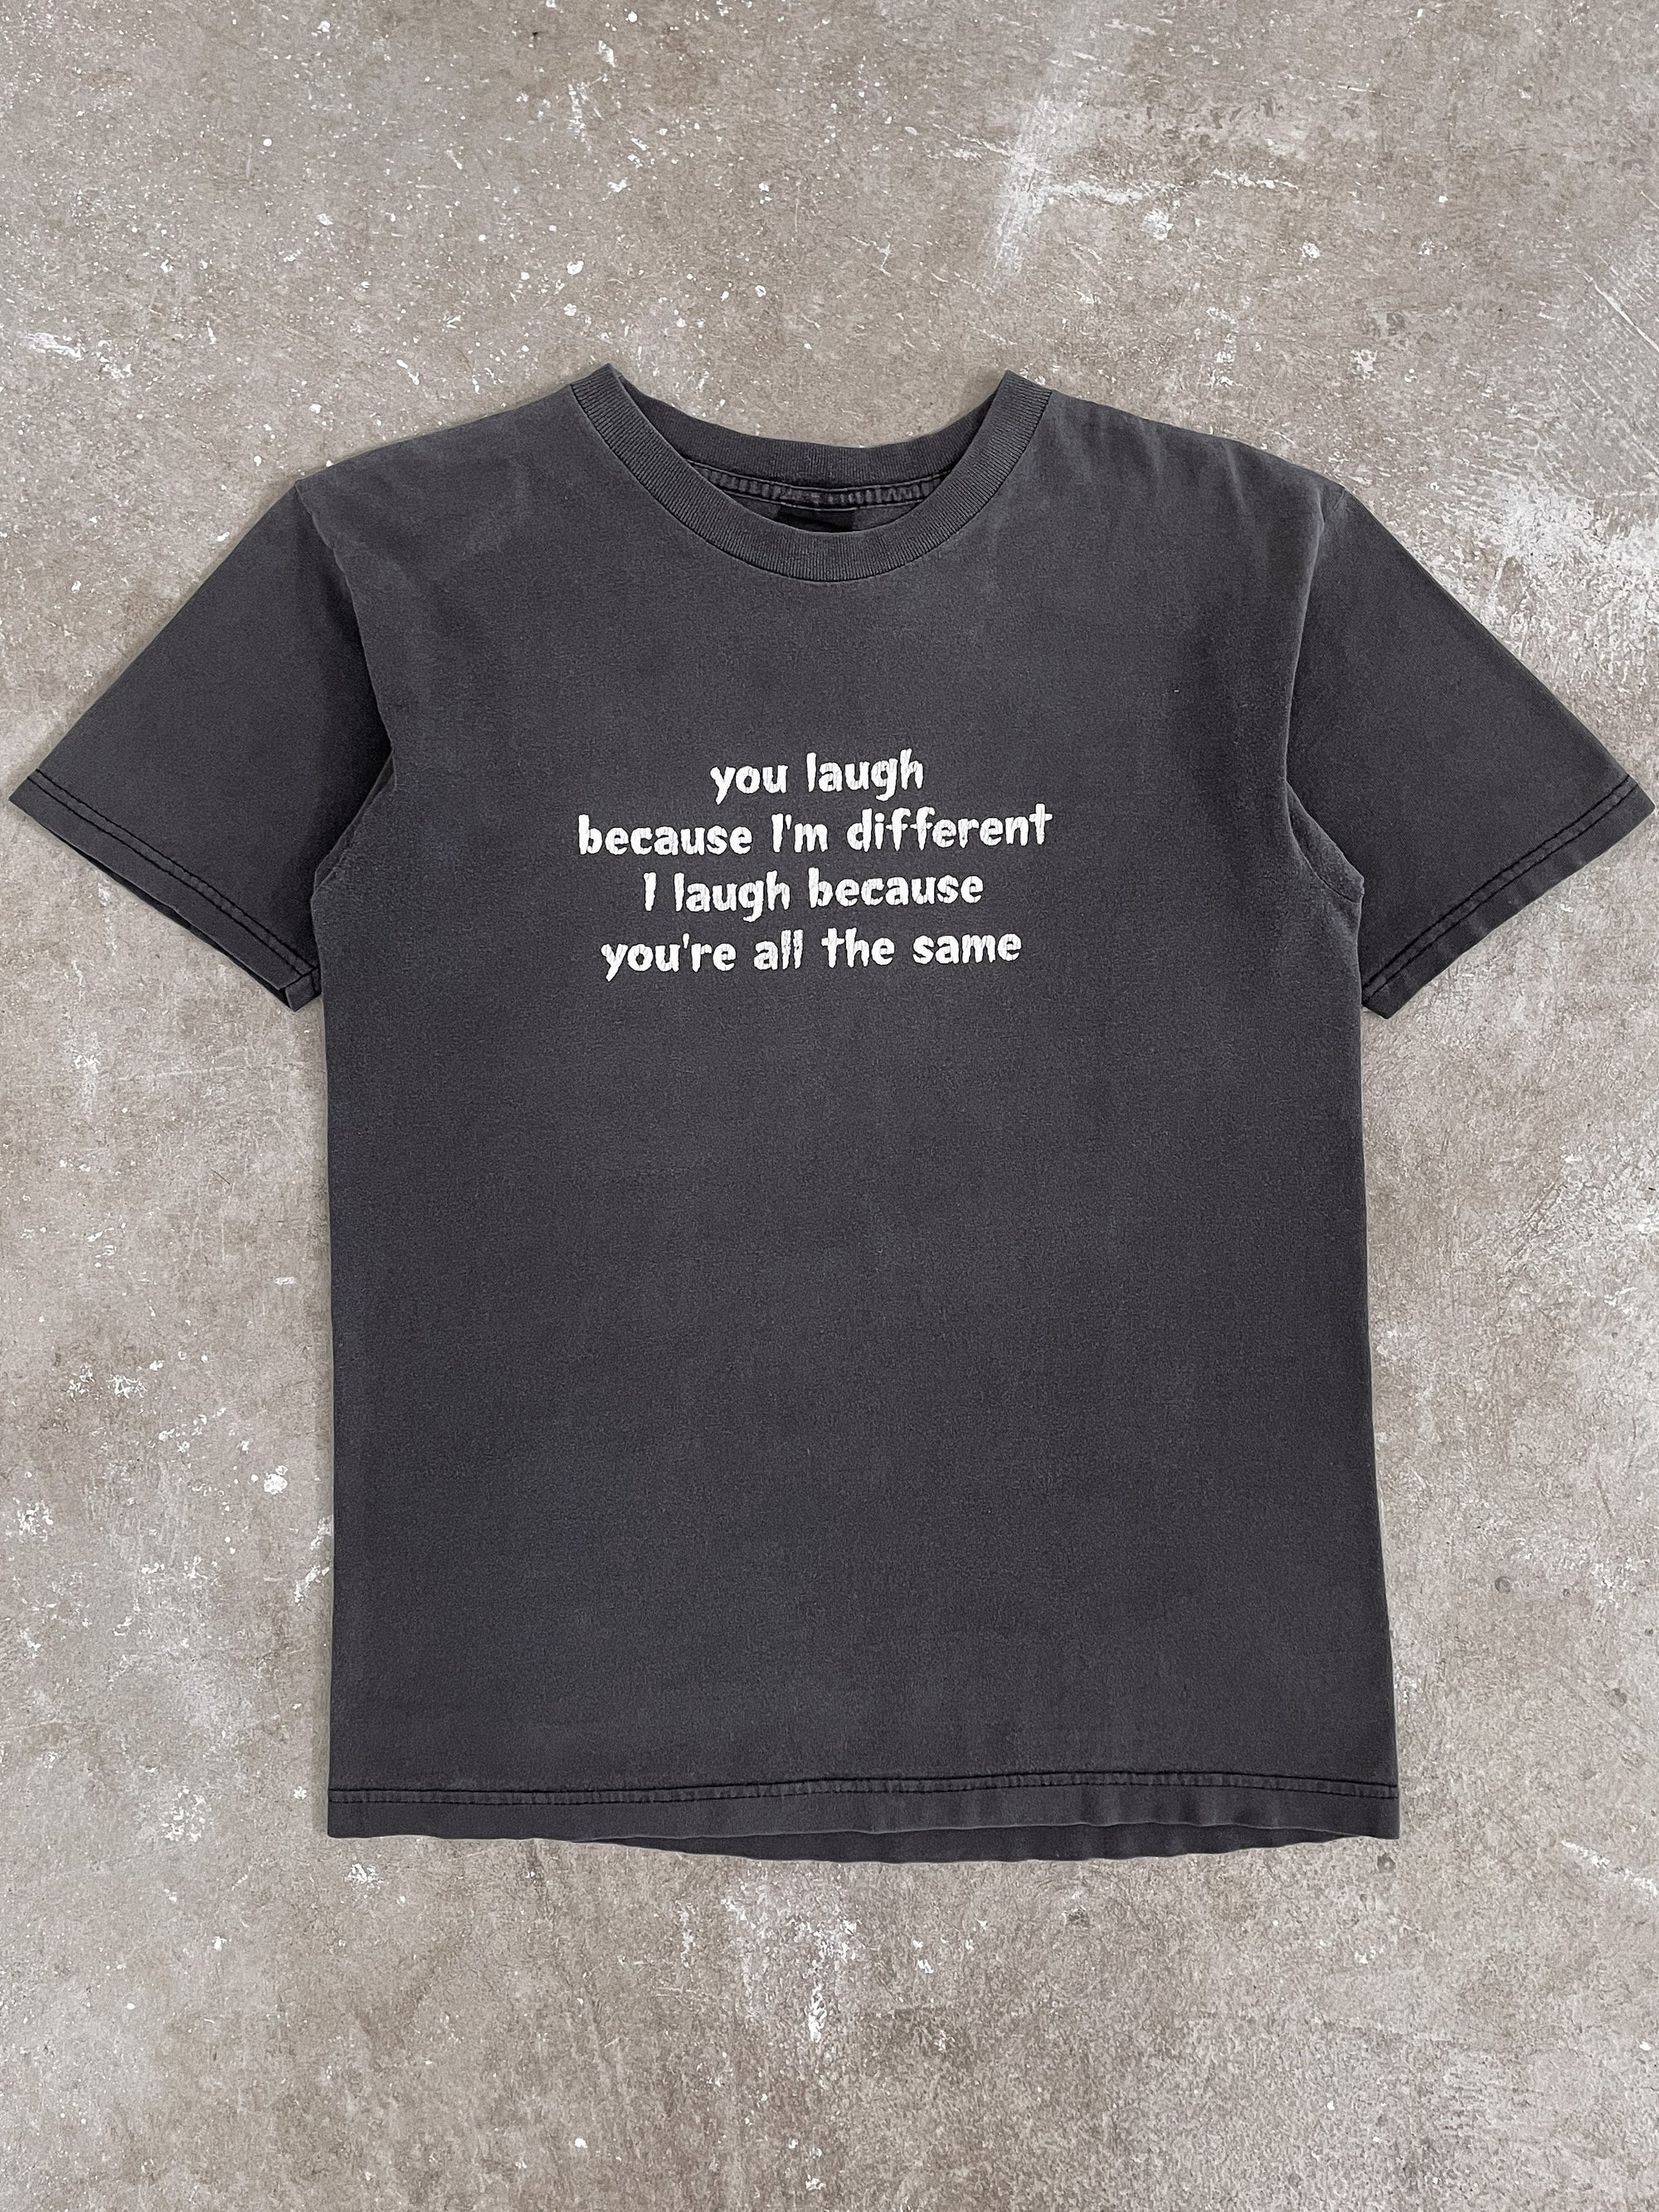 2000s “You Laugh Because I’m Different…” Faded Tee (M)